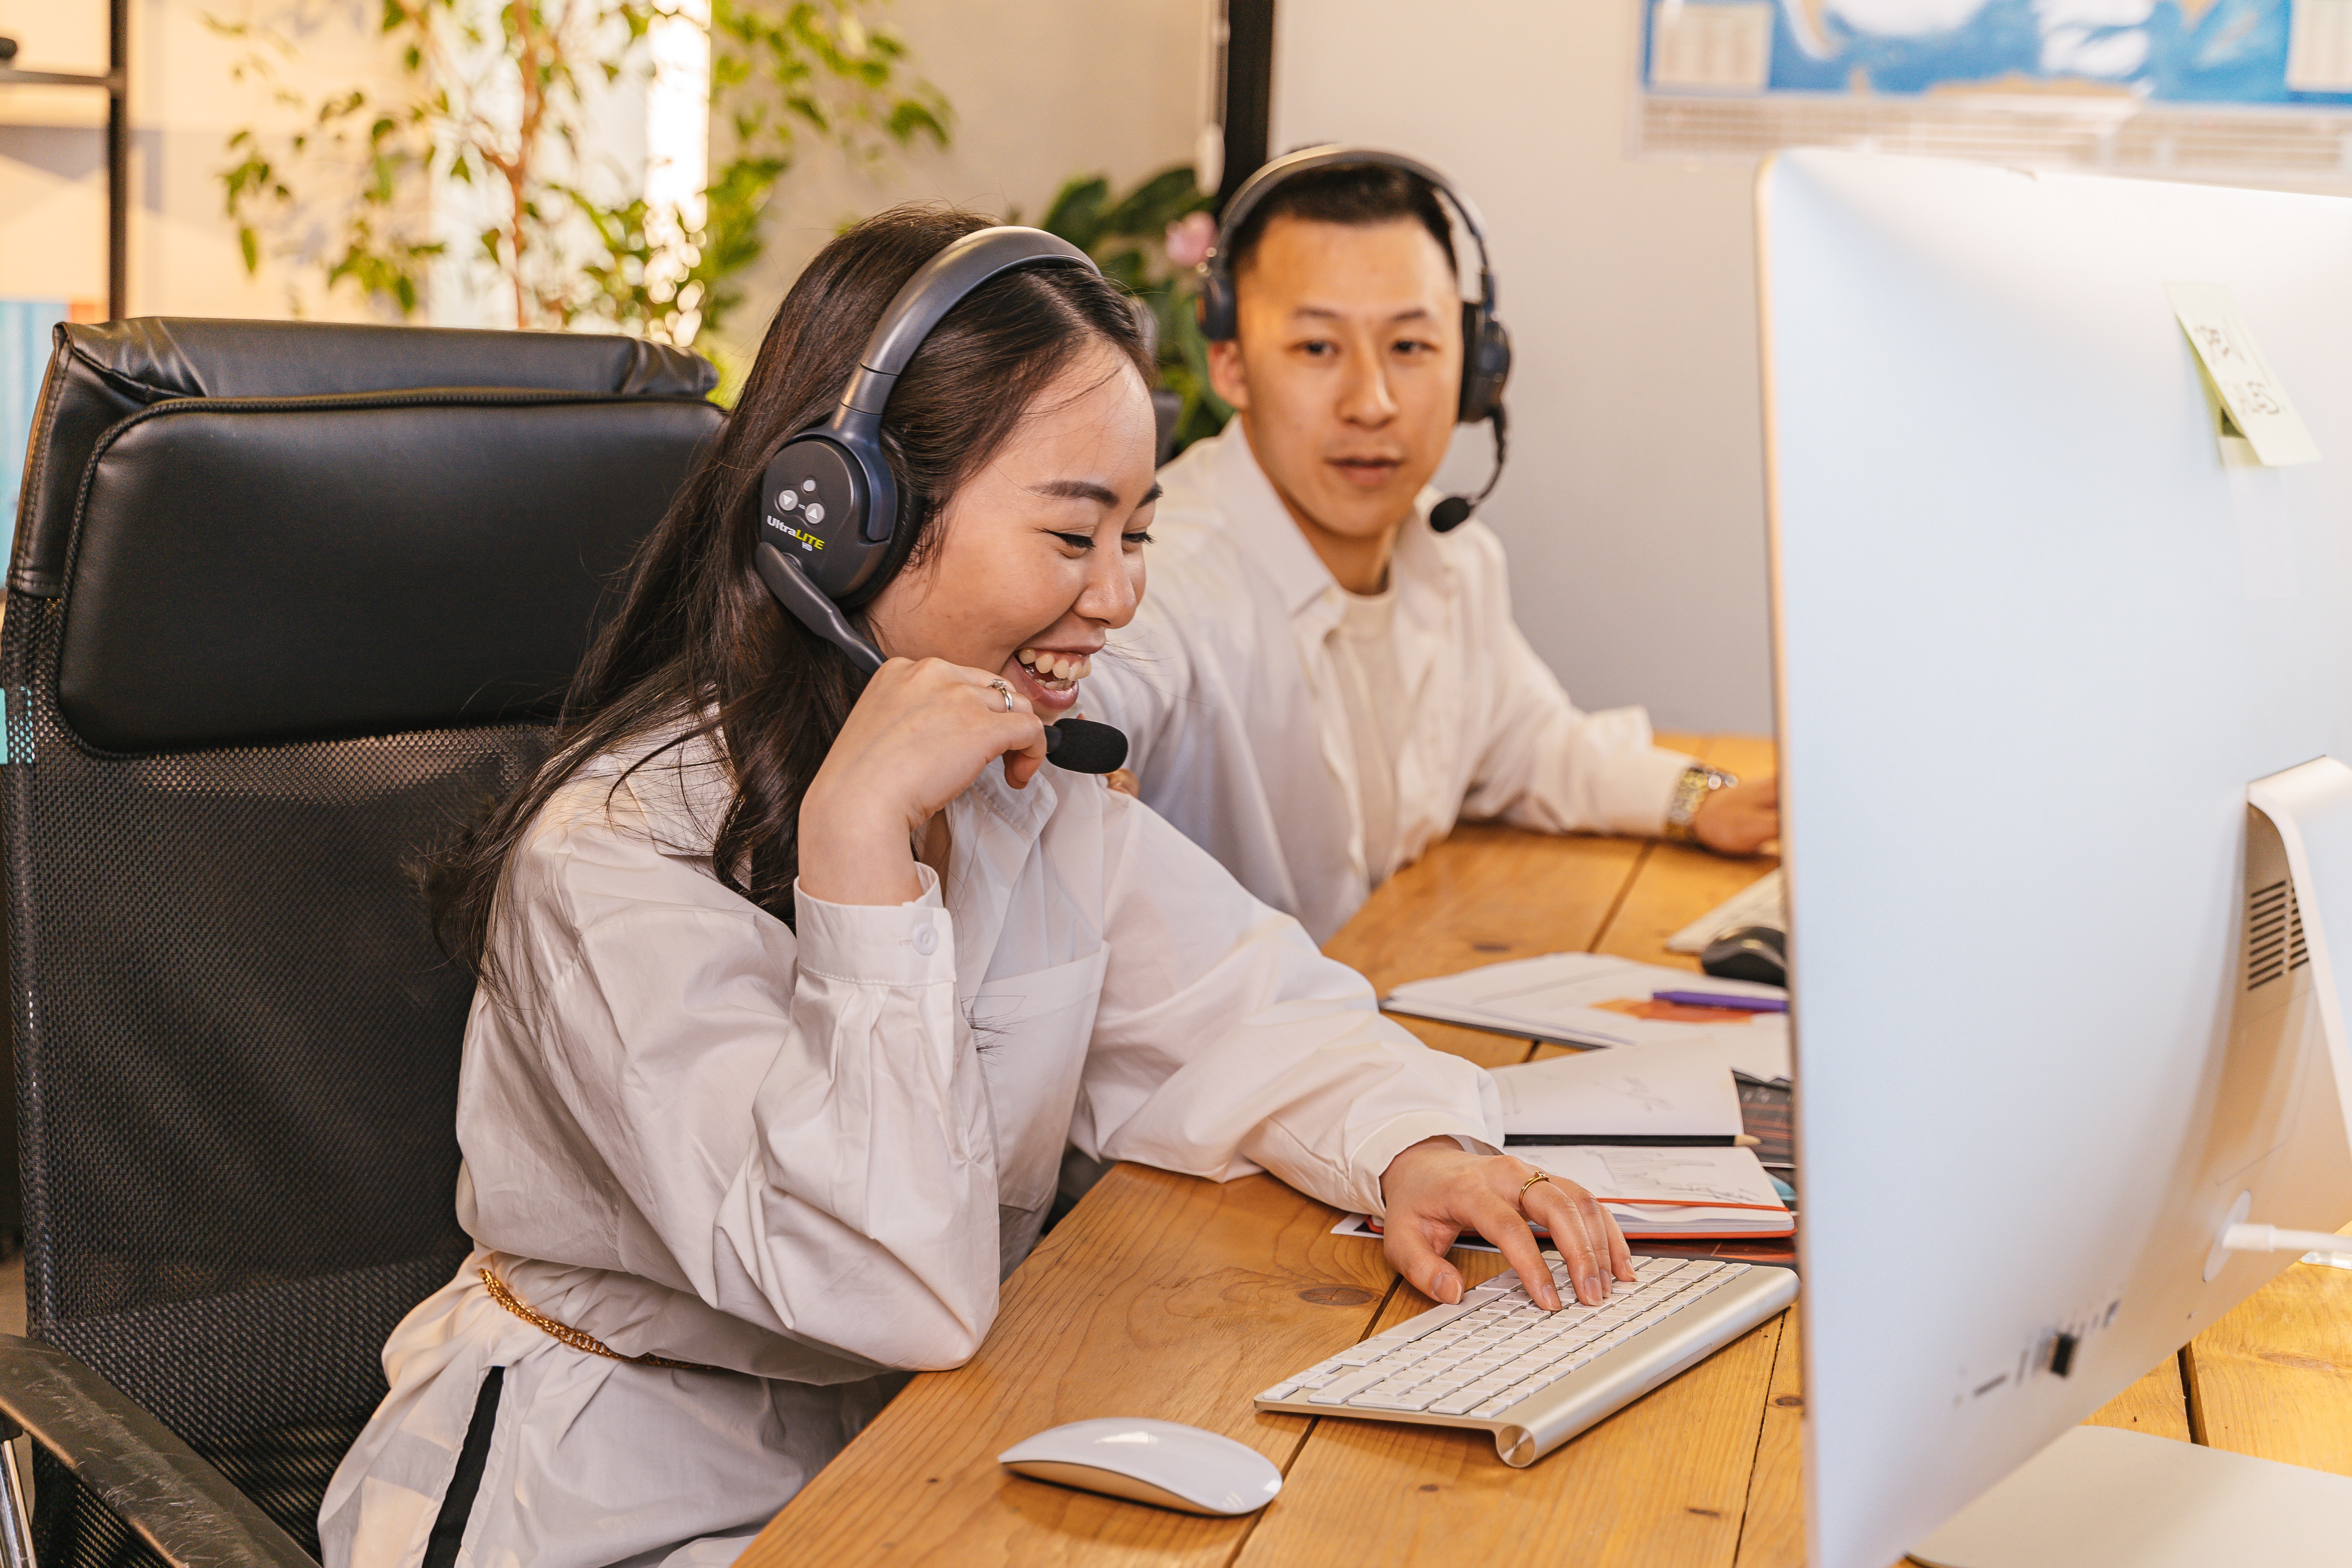 Image of 6 Advantages of Call Center Agents from Other Customer Service Channels